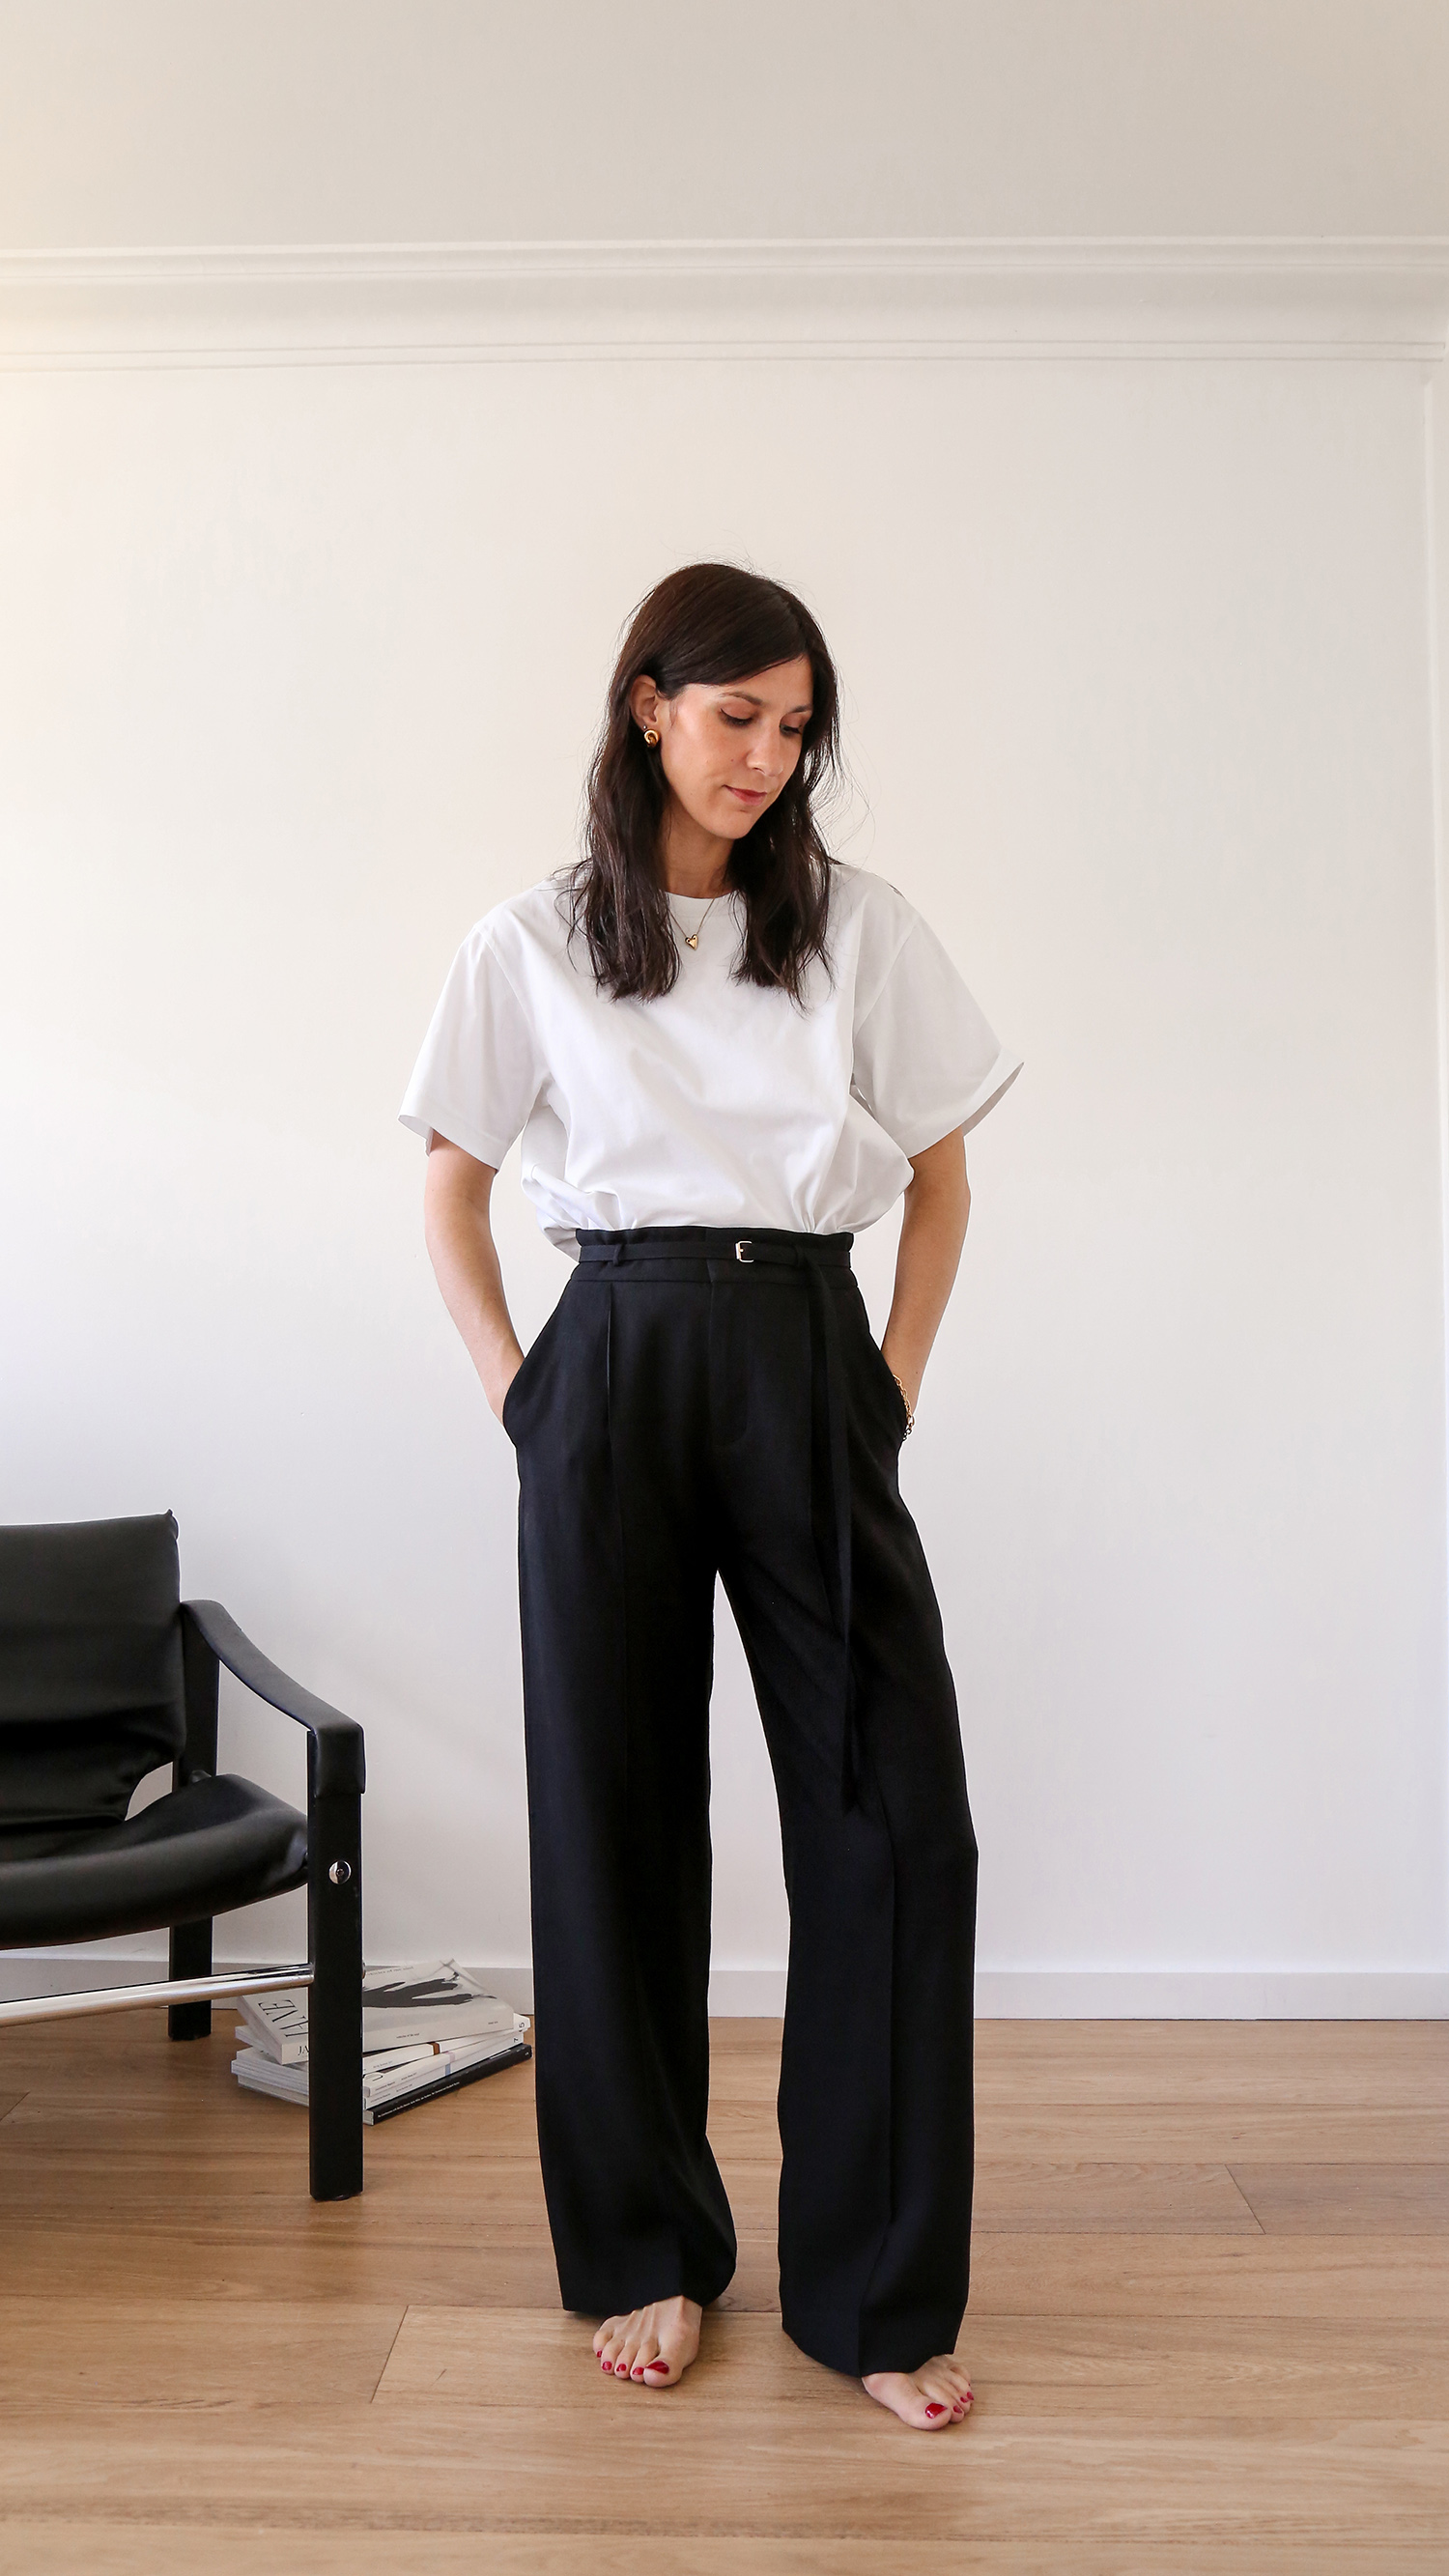 One base, five outfits - Mademoiselle | Minimal Style Blog